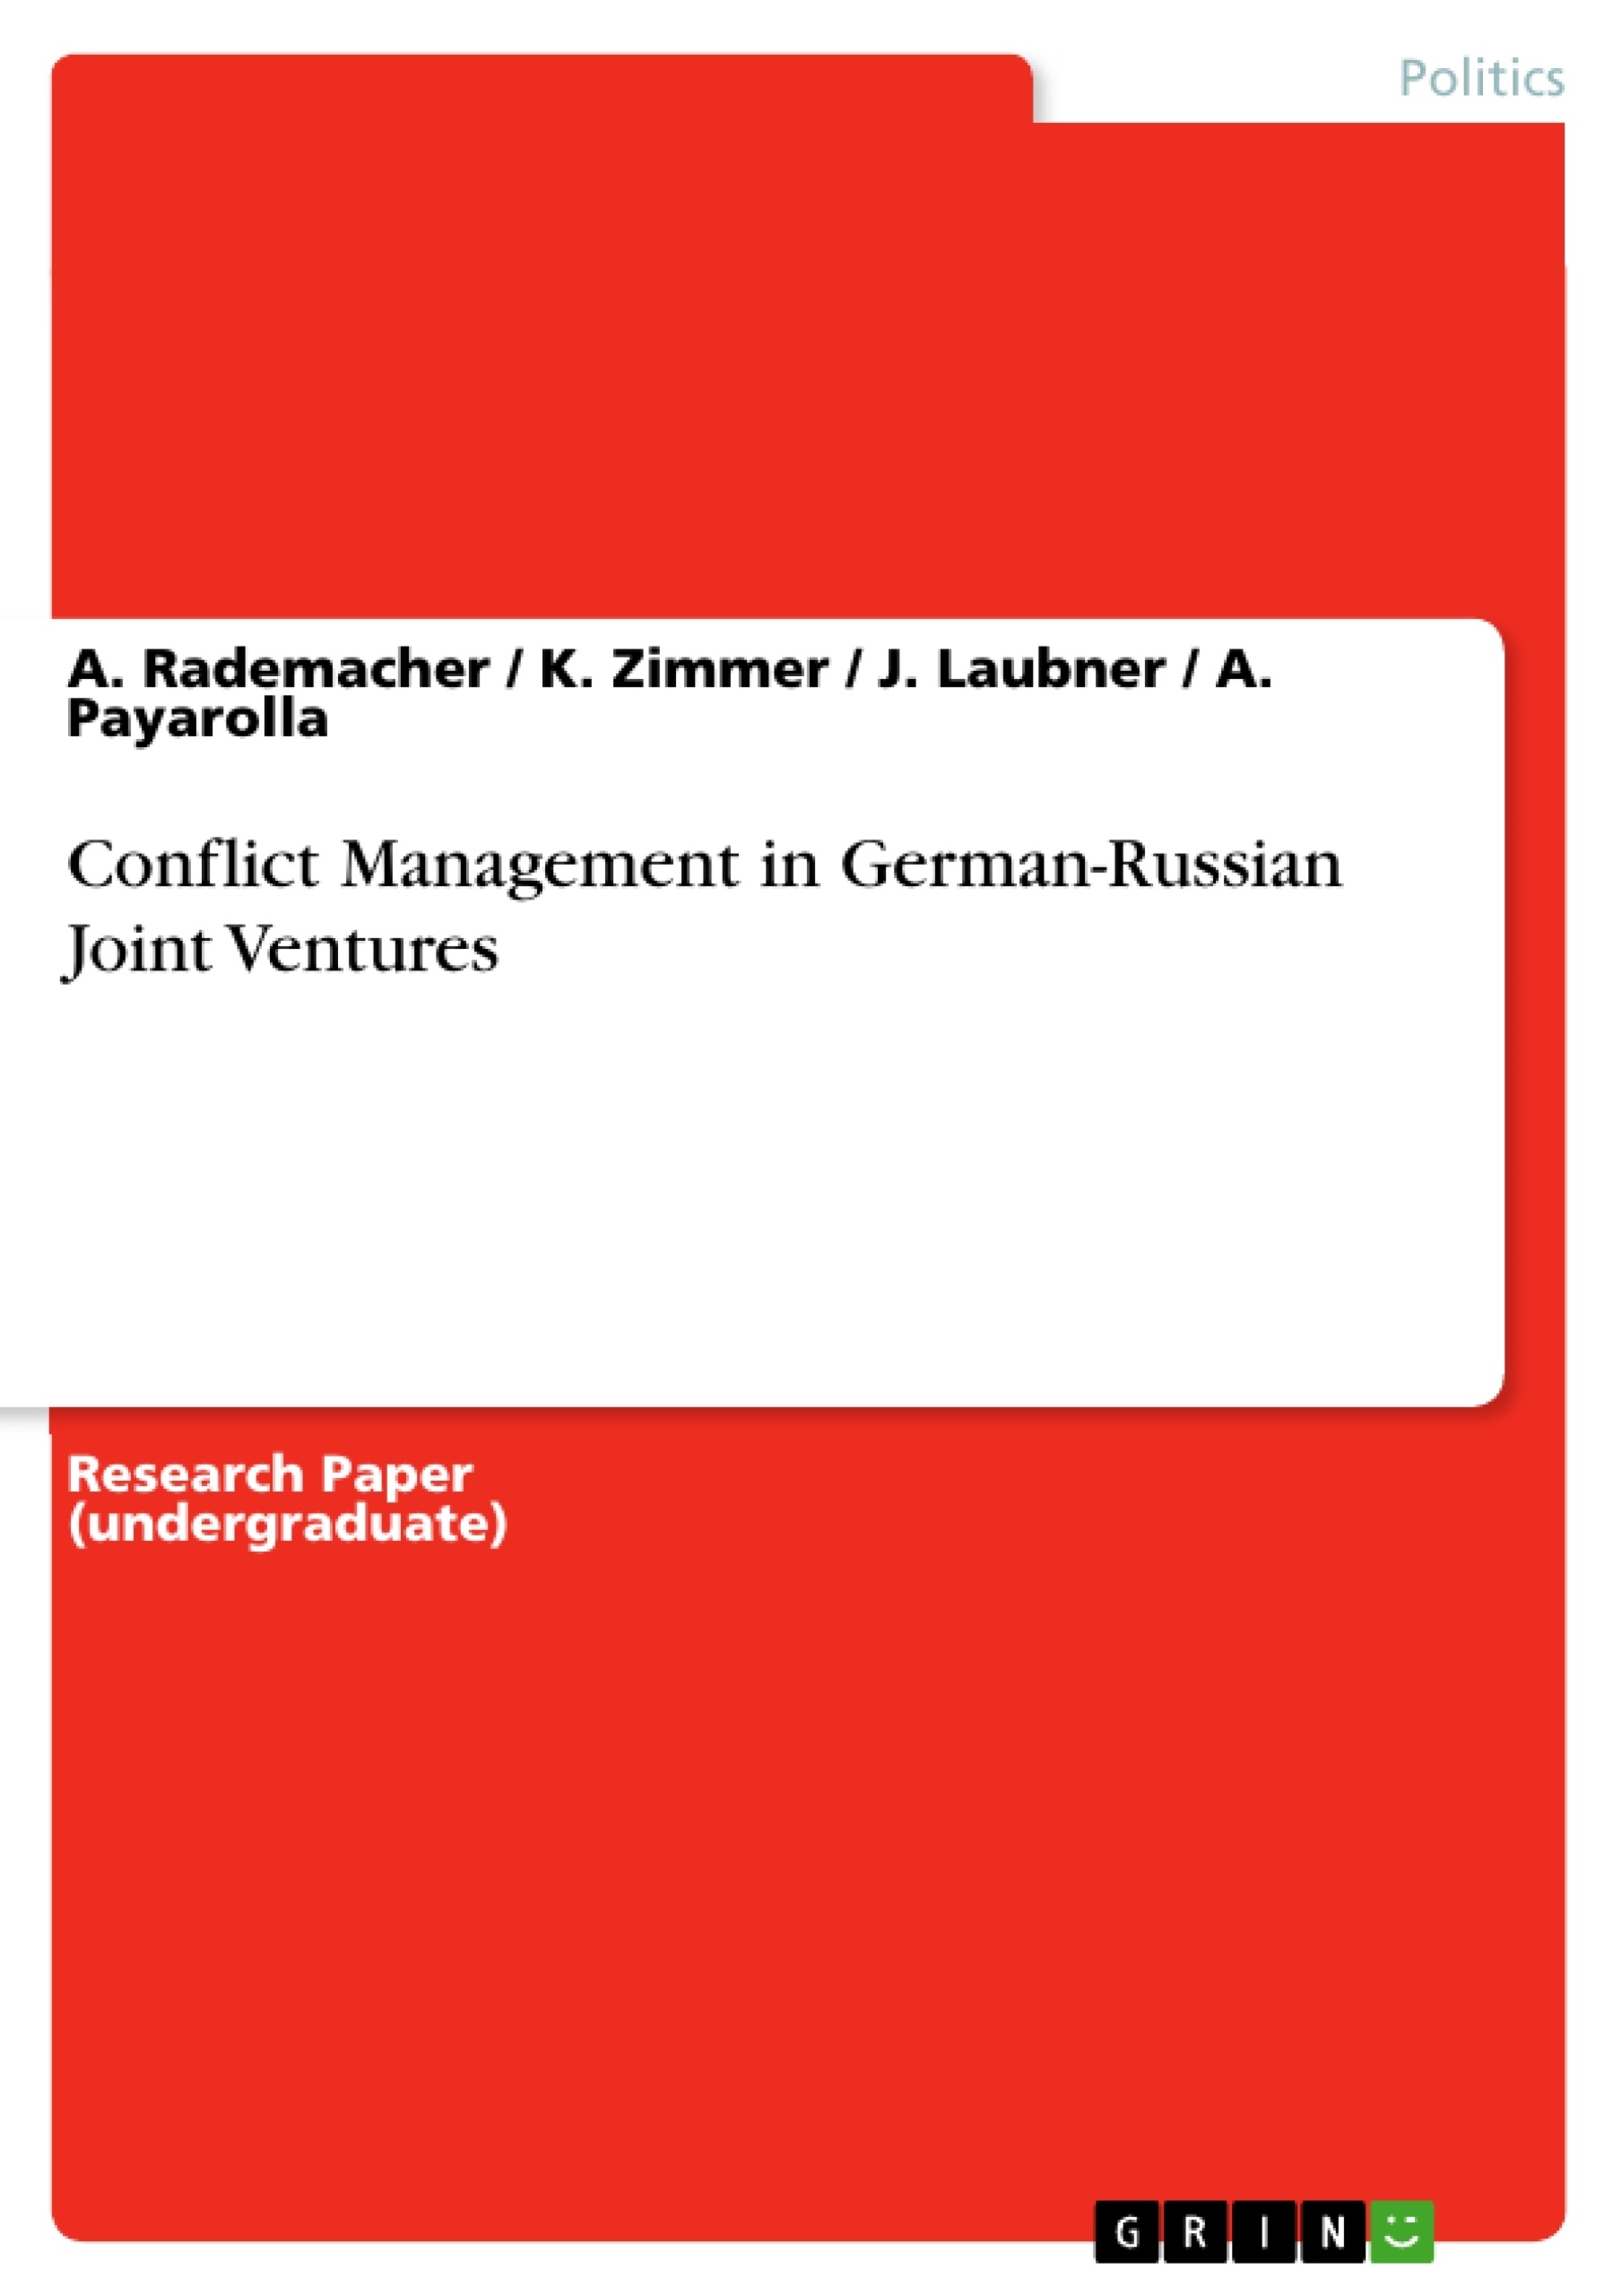 Title: Conflict Management in German-Russian Joint Ventures